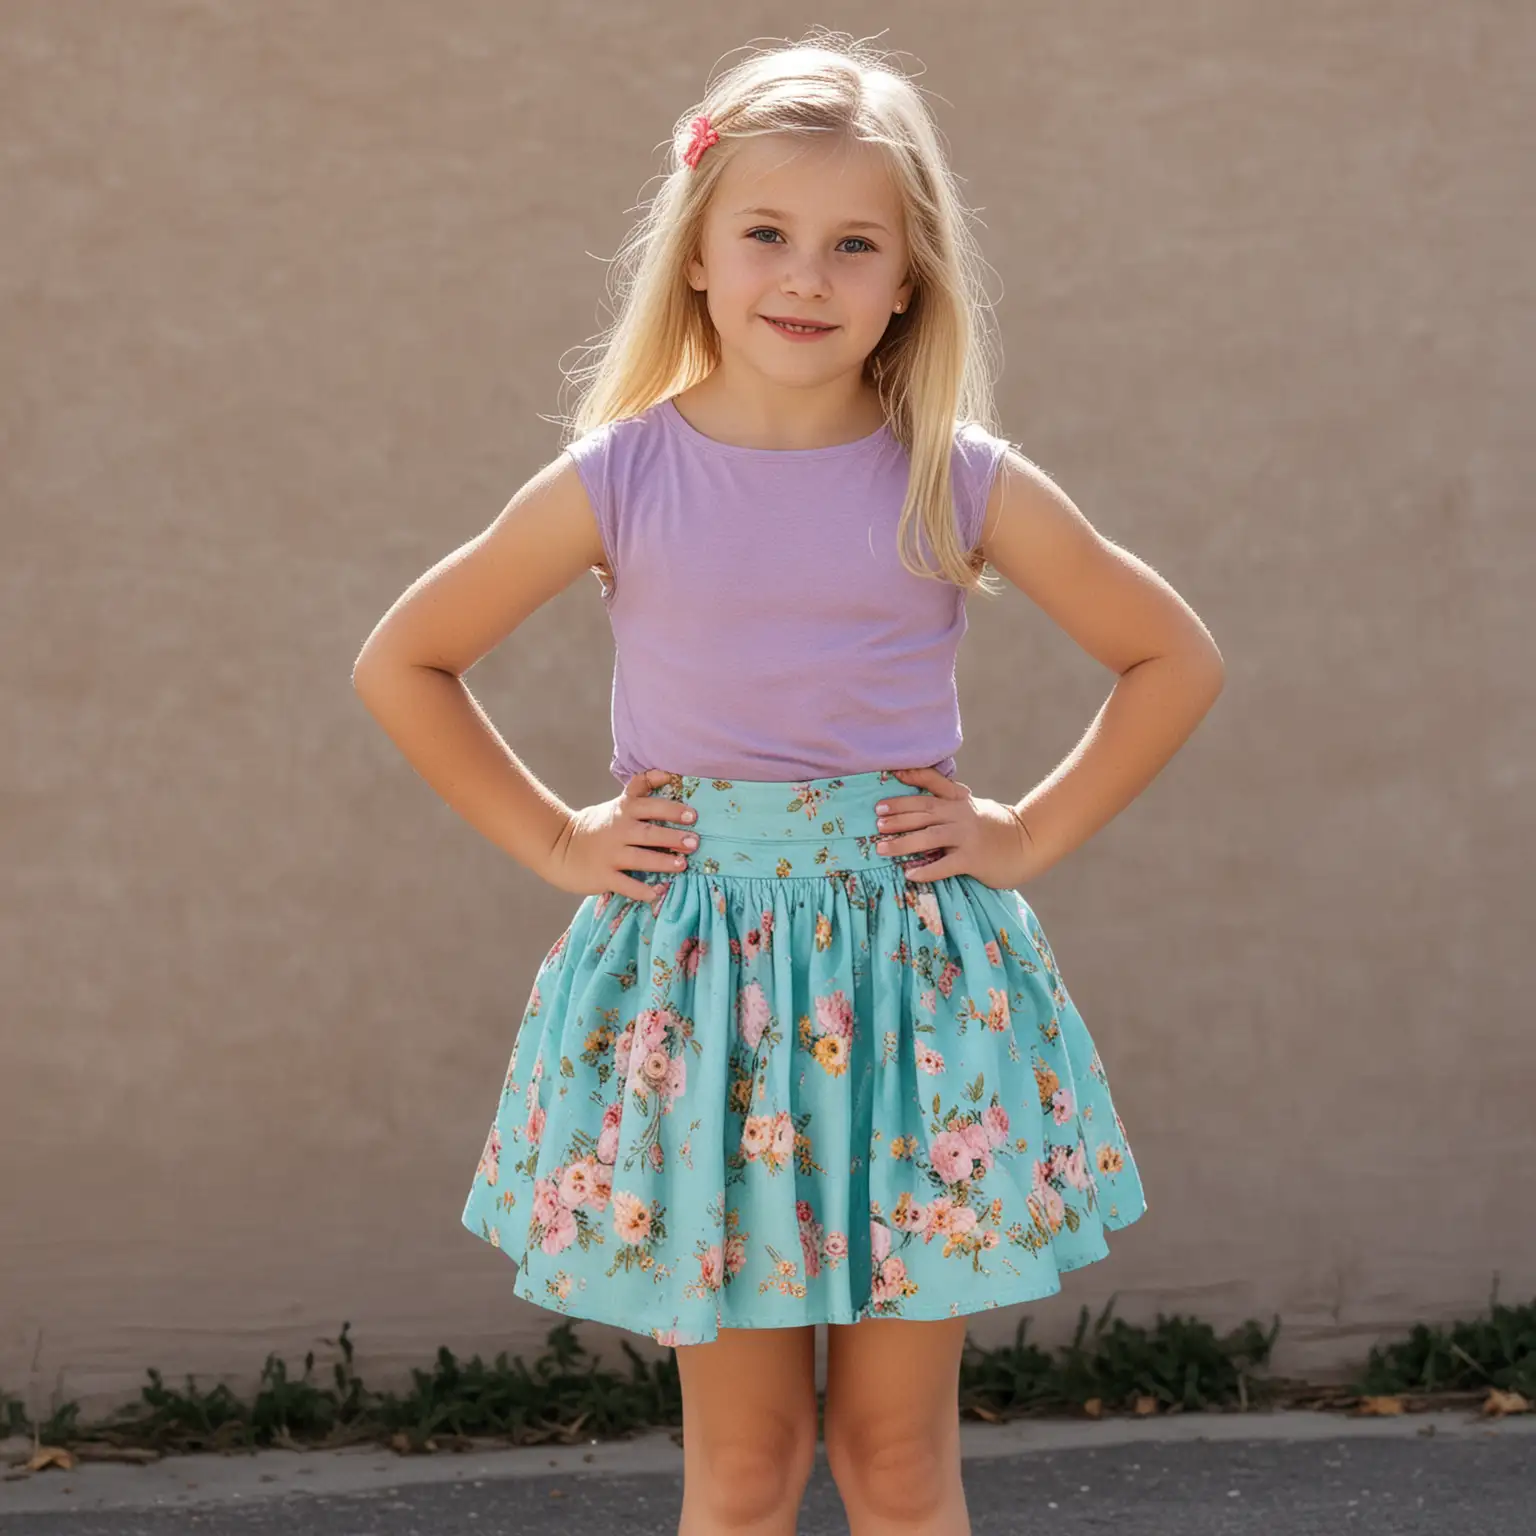 Young-Blonde-Girl-in-Skirt-Aged-10-Playful-and-Bright